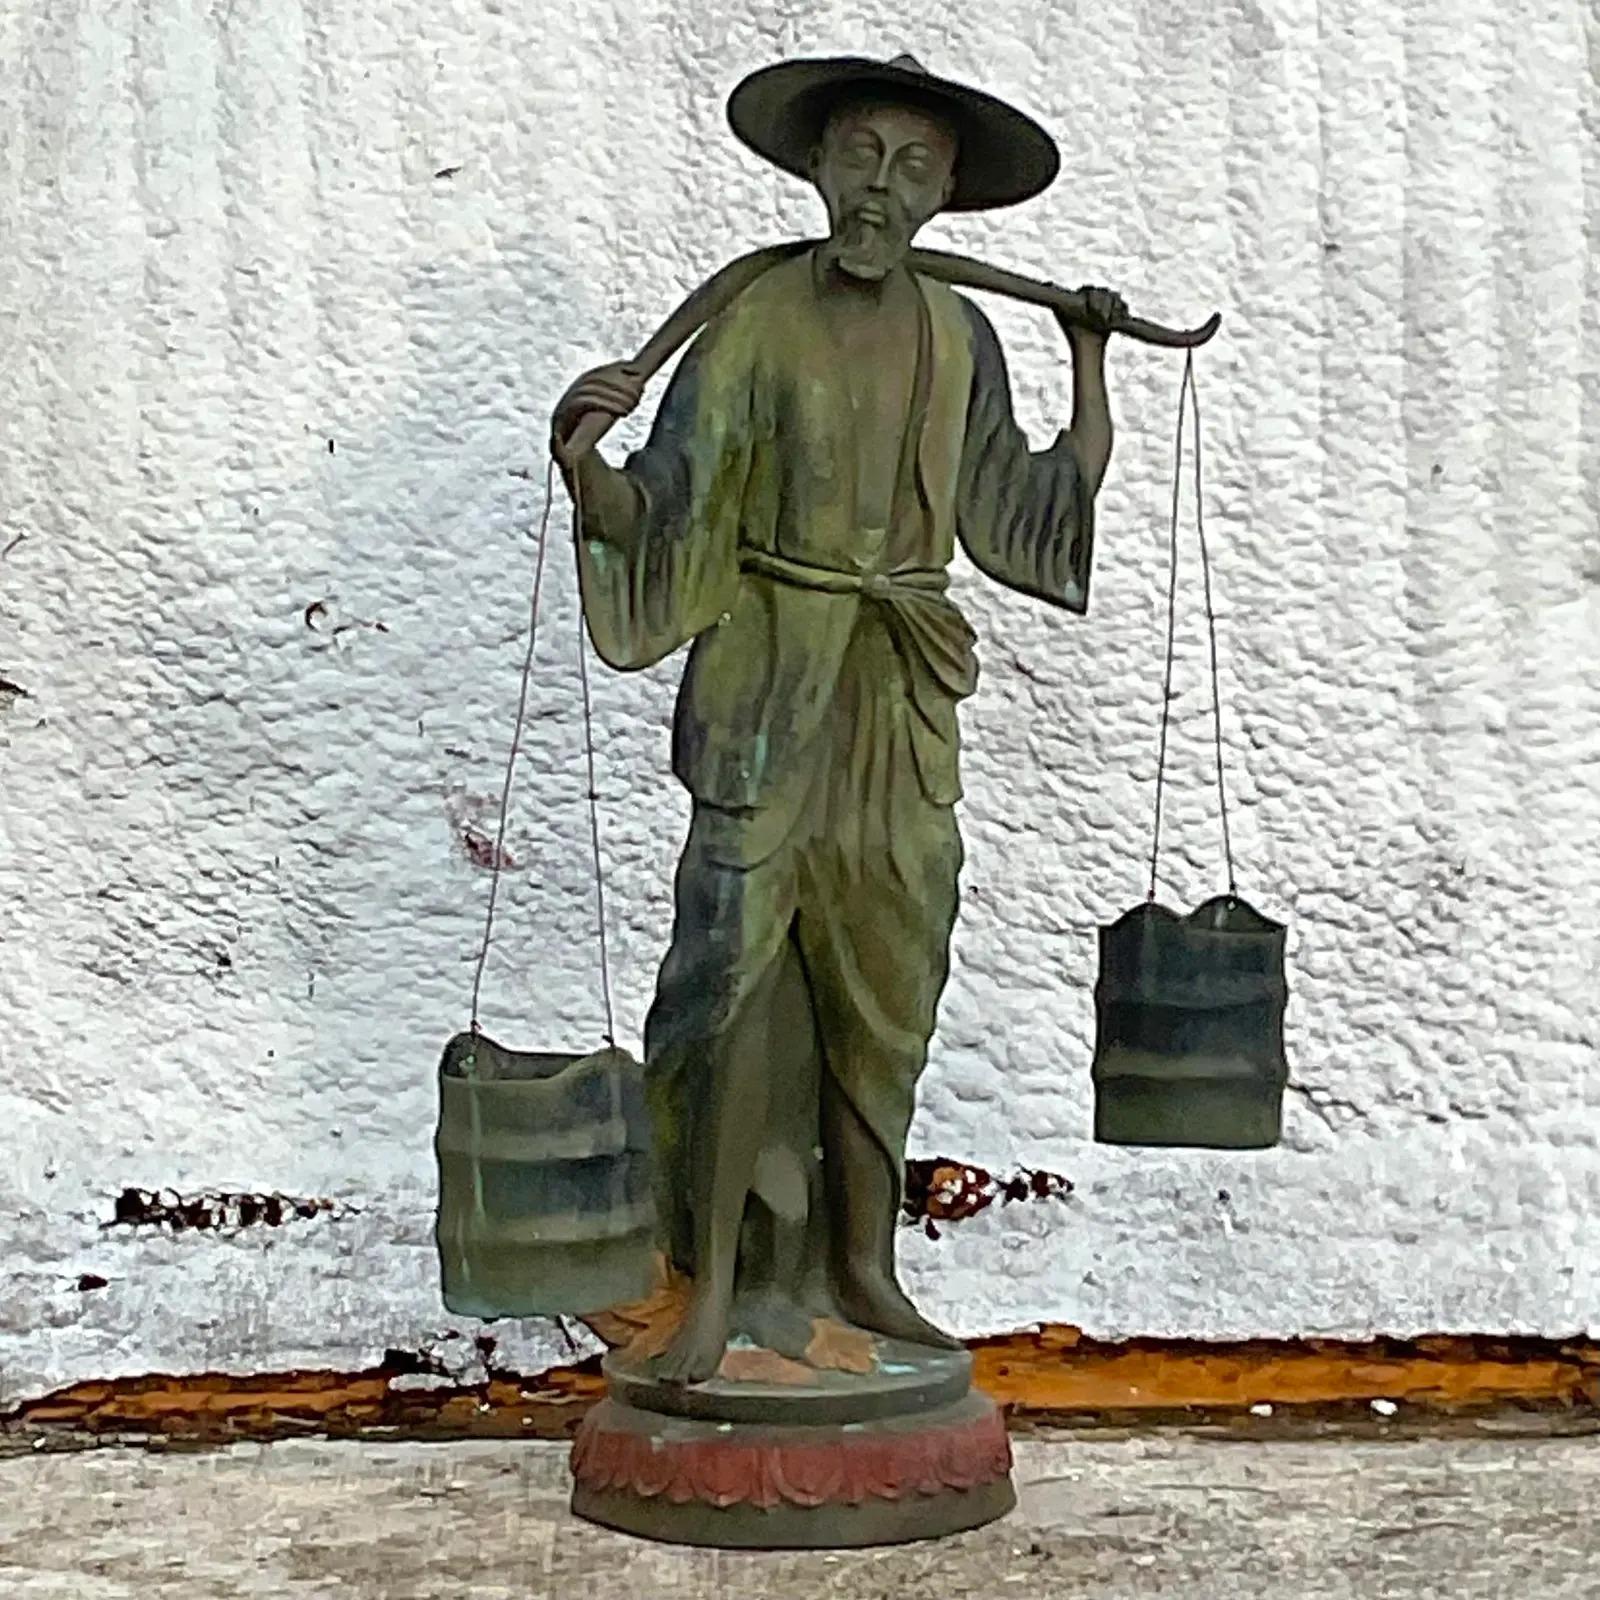 A chic and fantastic vintage Regency bronze sculpture. A striking composition of a man carrying water buckets. Hand painted detail across the bottom of figure. Acquired from a Palm Beach estate.

The sculpture is in great vintage condition. Minor